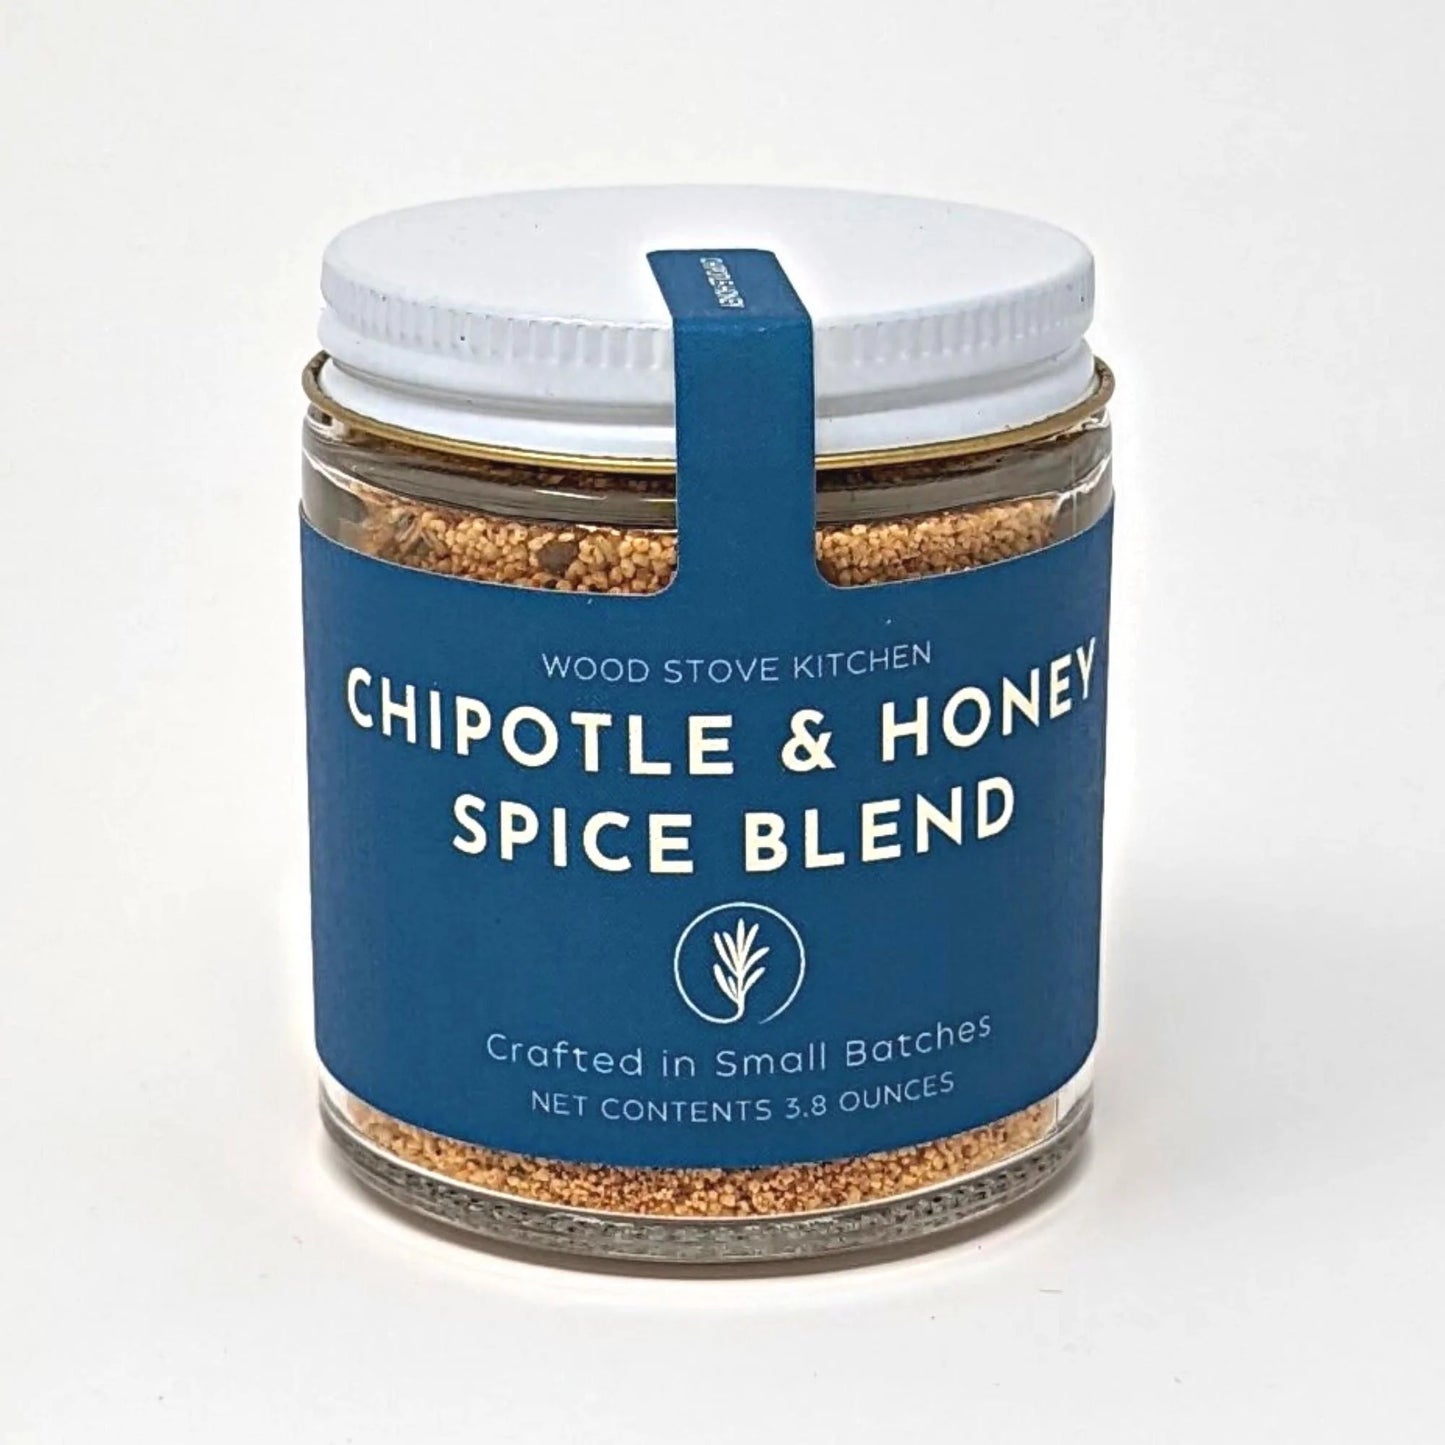 Woodstove Kitchen - Chipotle and Honey Spice Blend